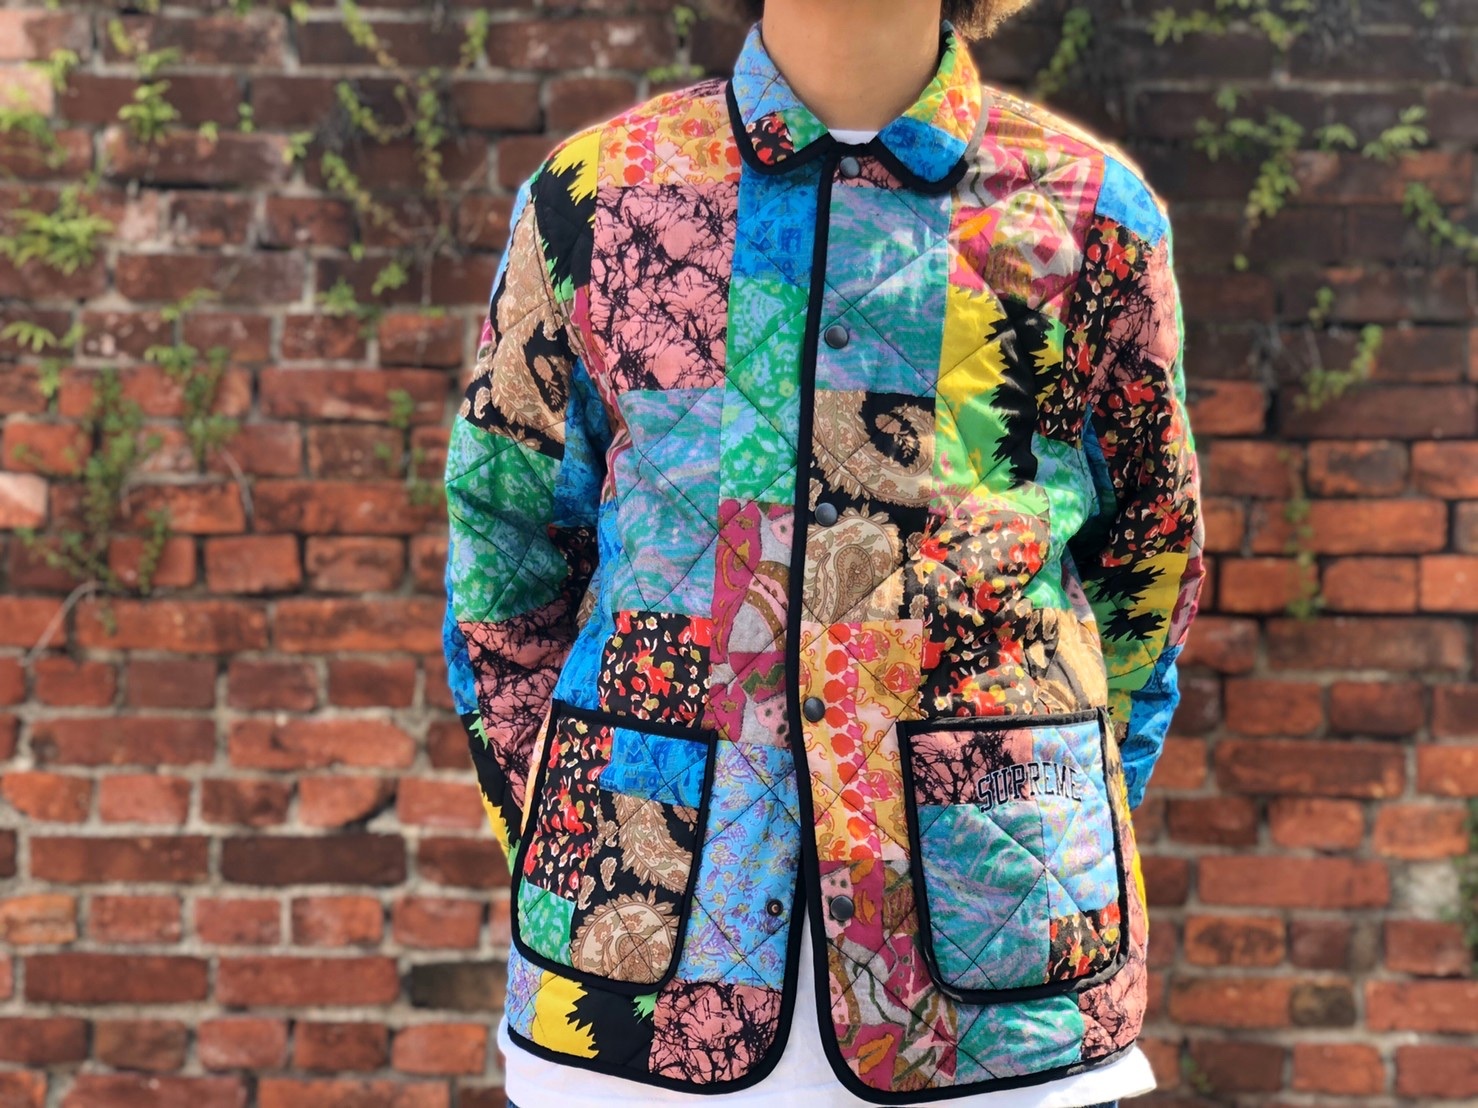 supreme reversible patchwork quilted jacket